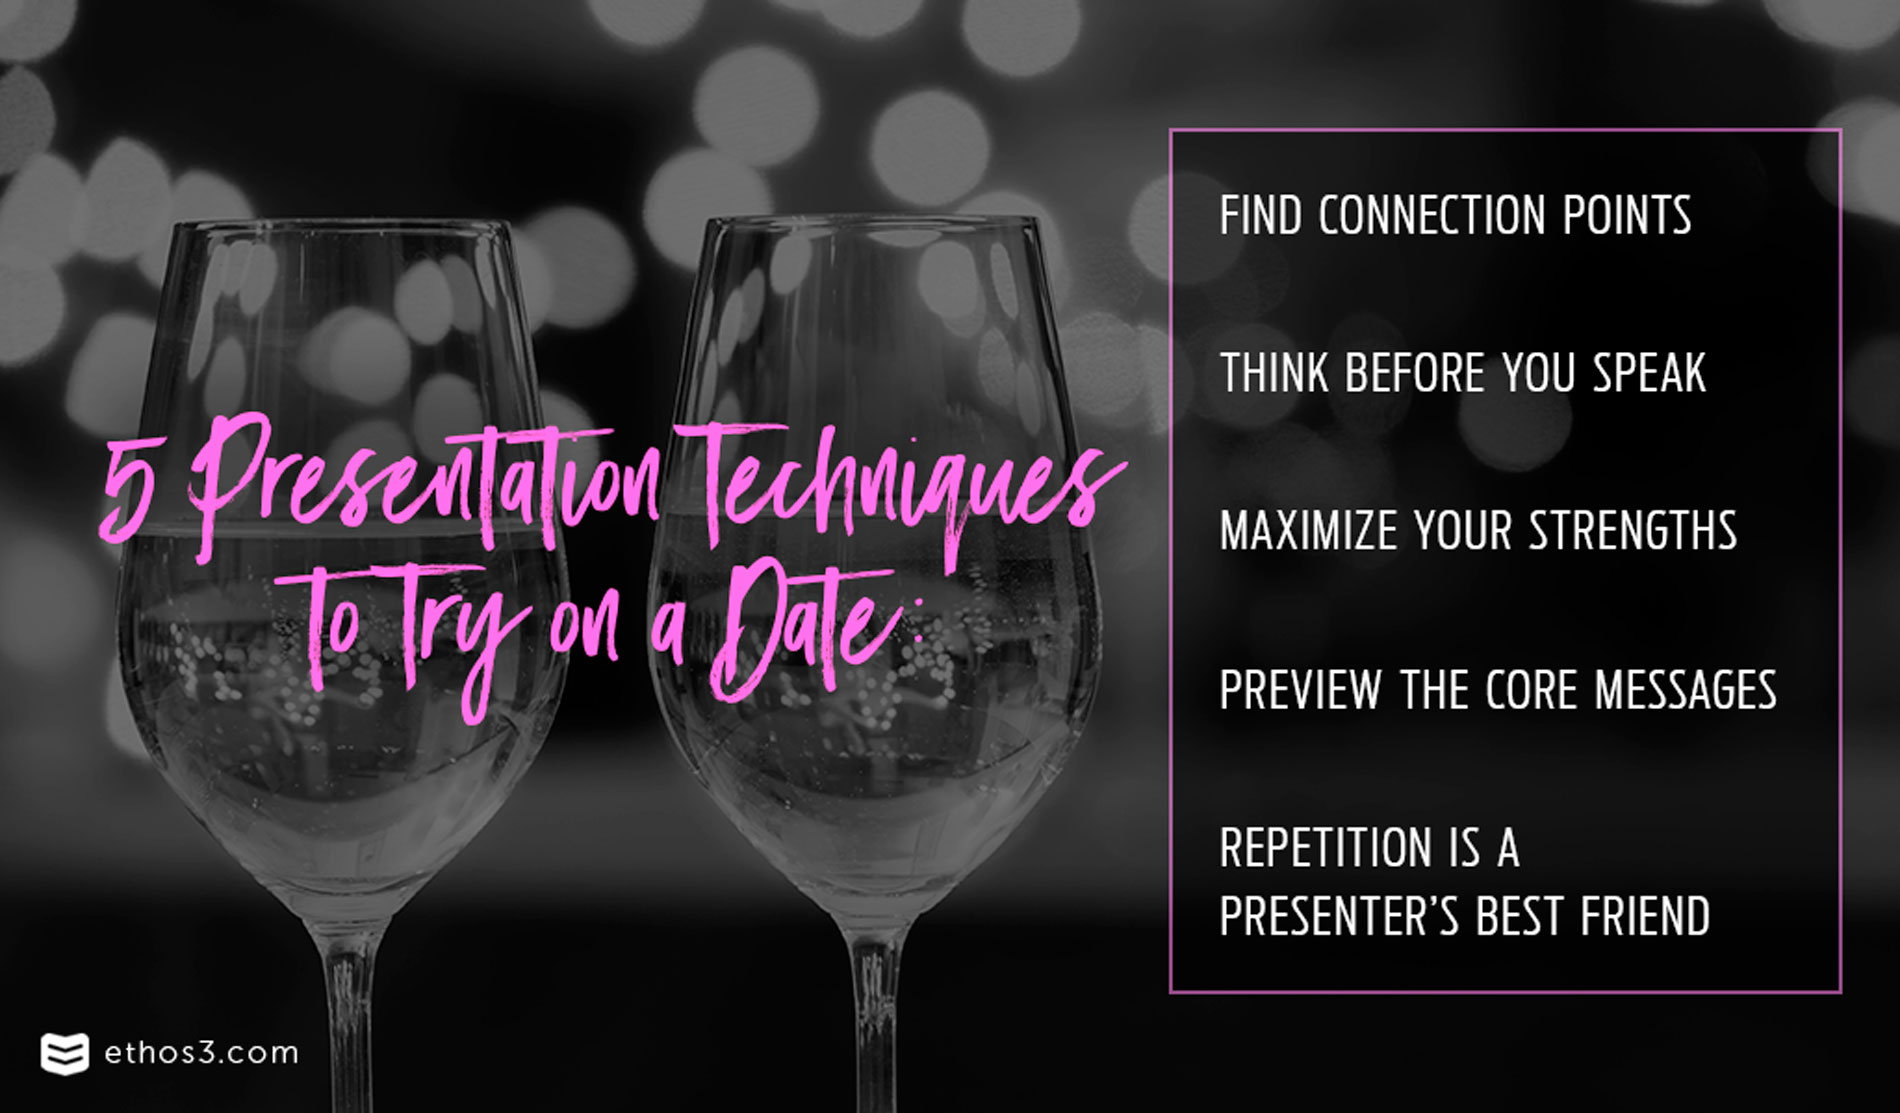 5 Presentation Techniques to Try on a Date